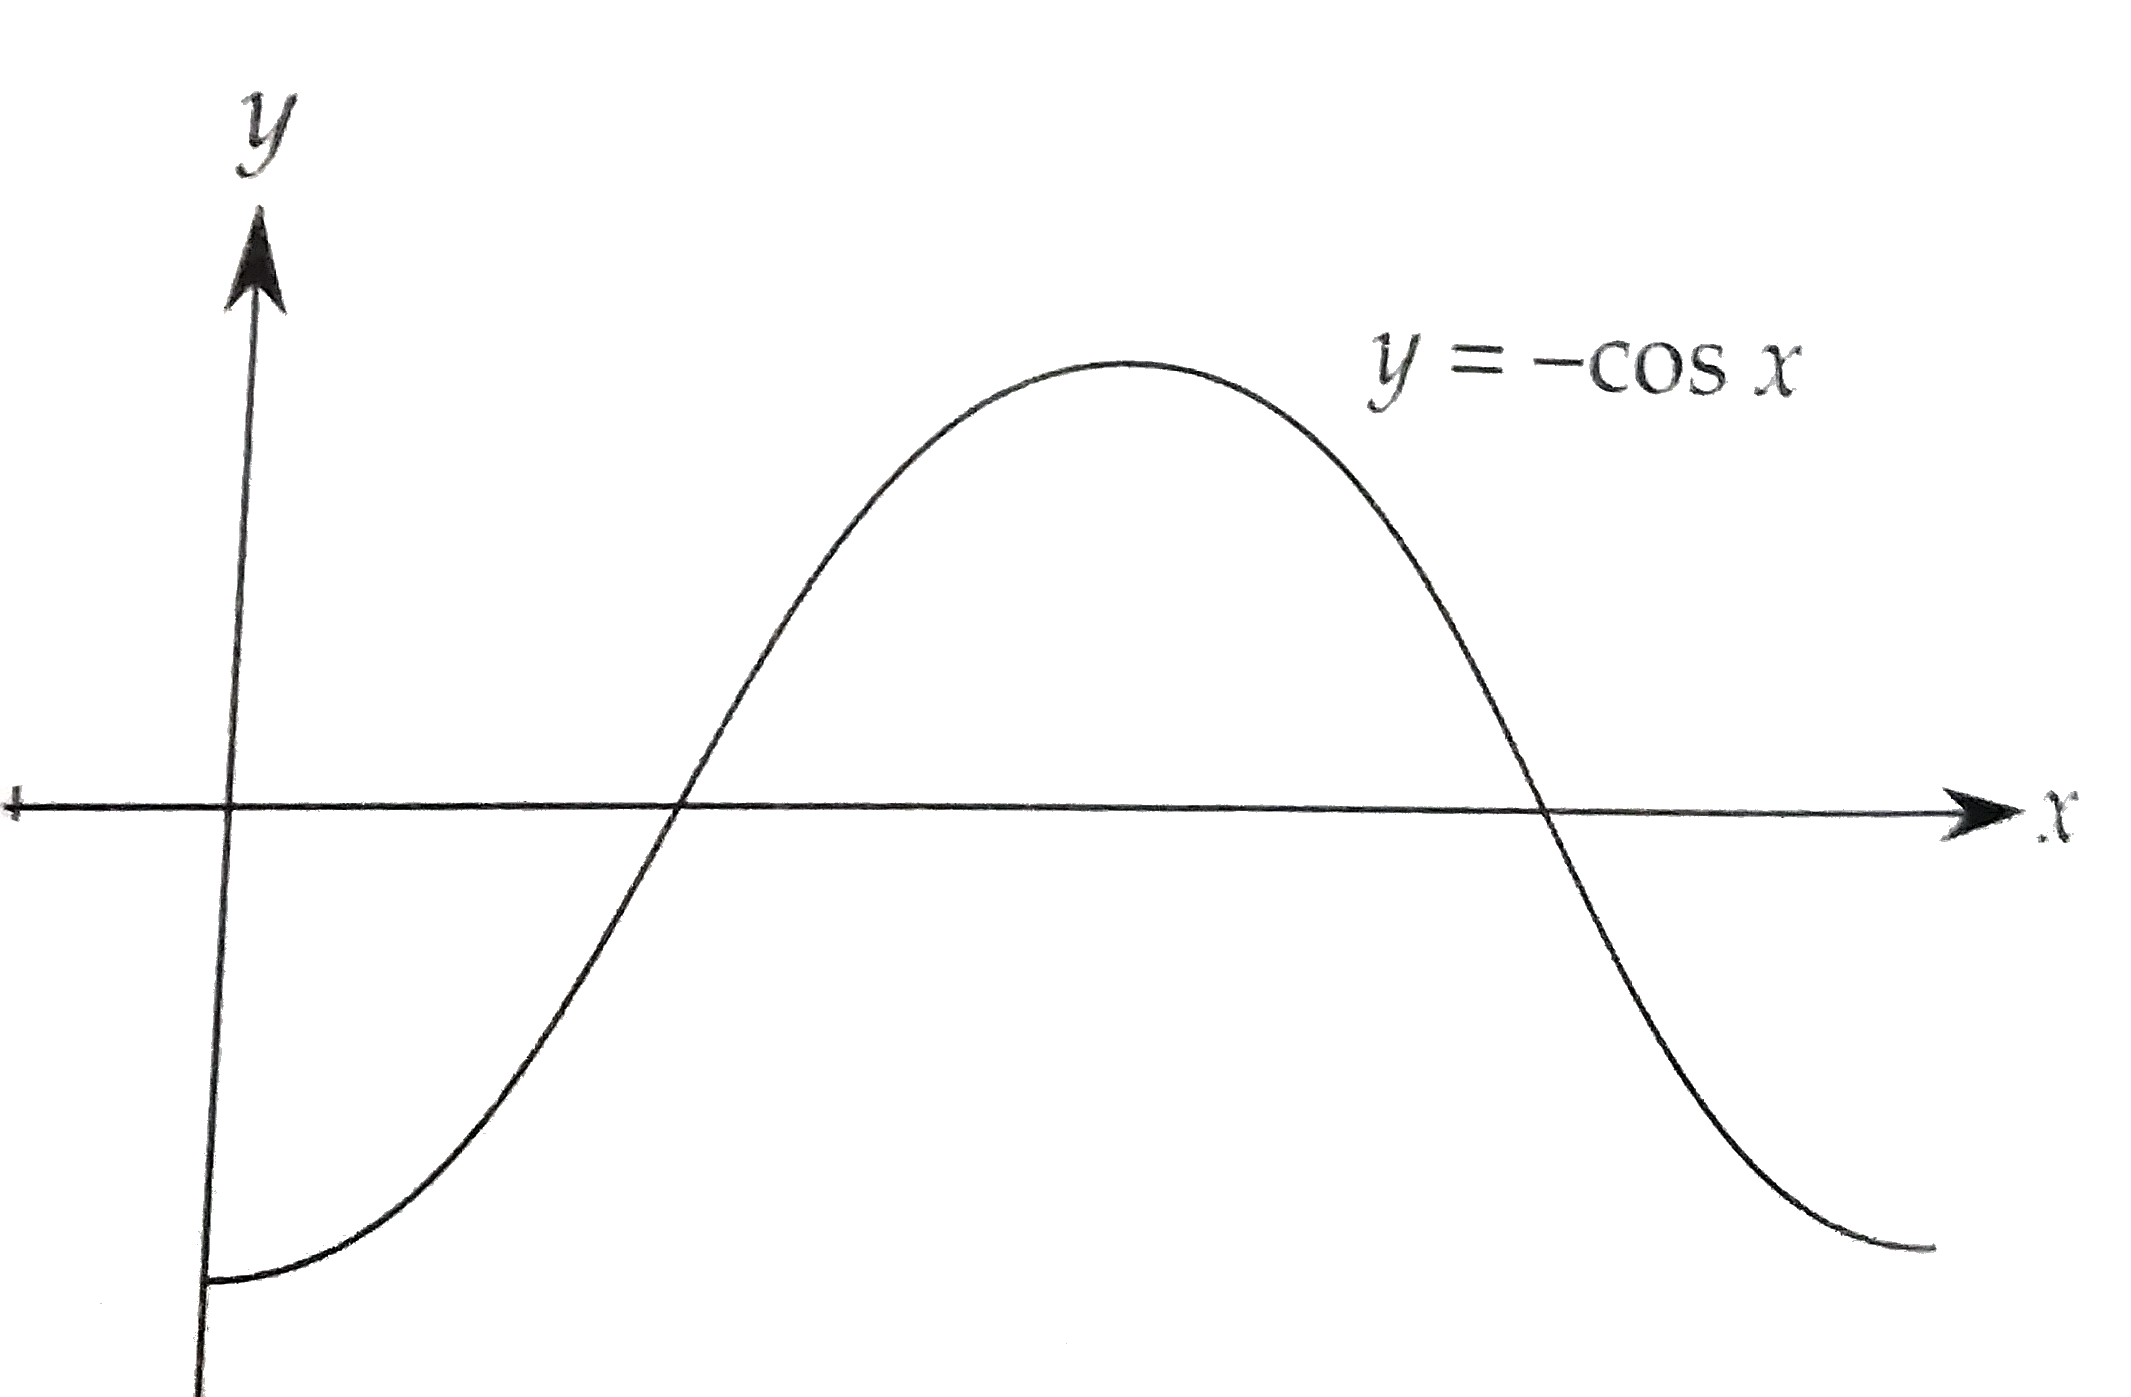 One complete of the graph of y = - cos x is shown in the Figure. What are the coordinates of the point at which the maximum possible value of y occurs ?